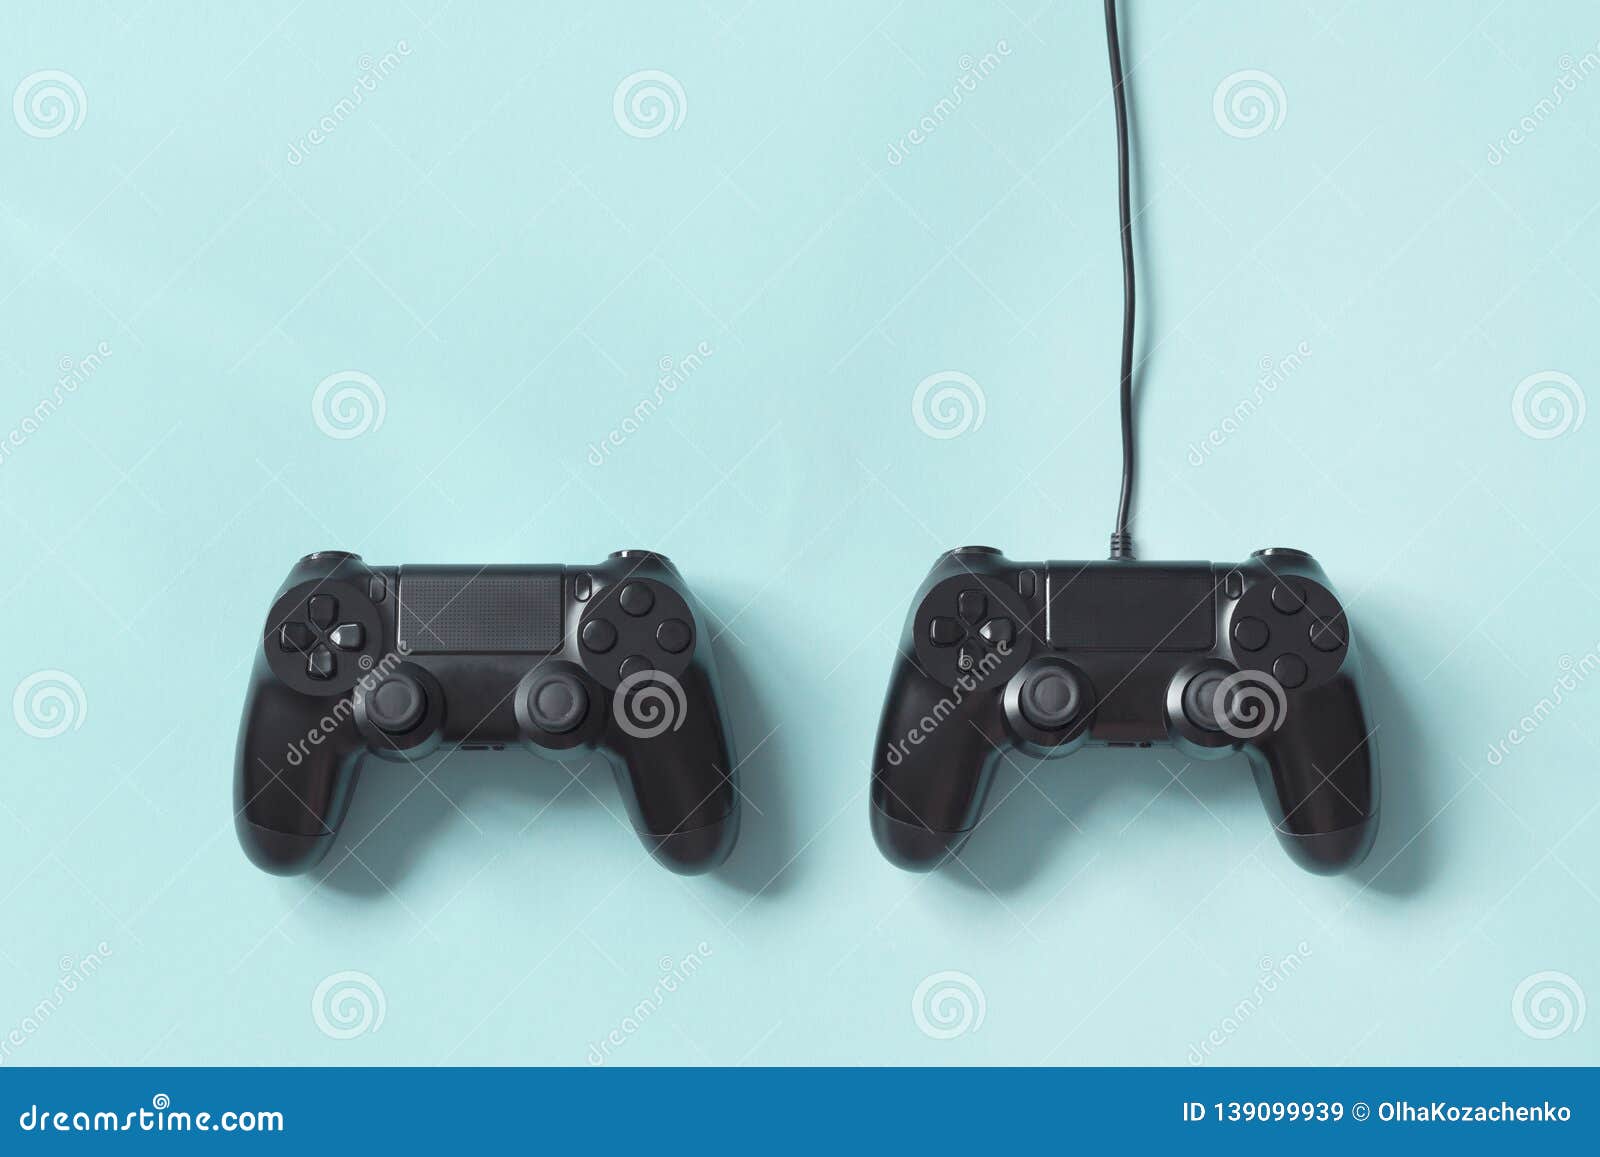 gamepad connected wire from the game console on blue background. concept of game tournaments